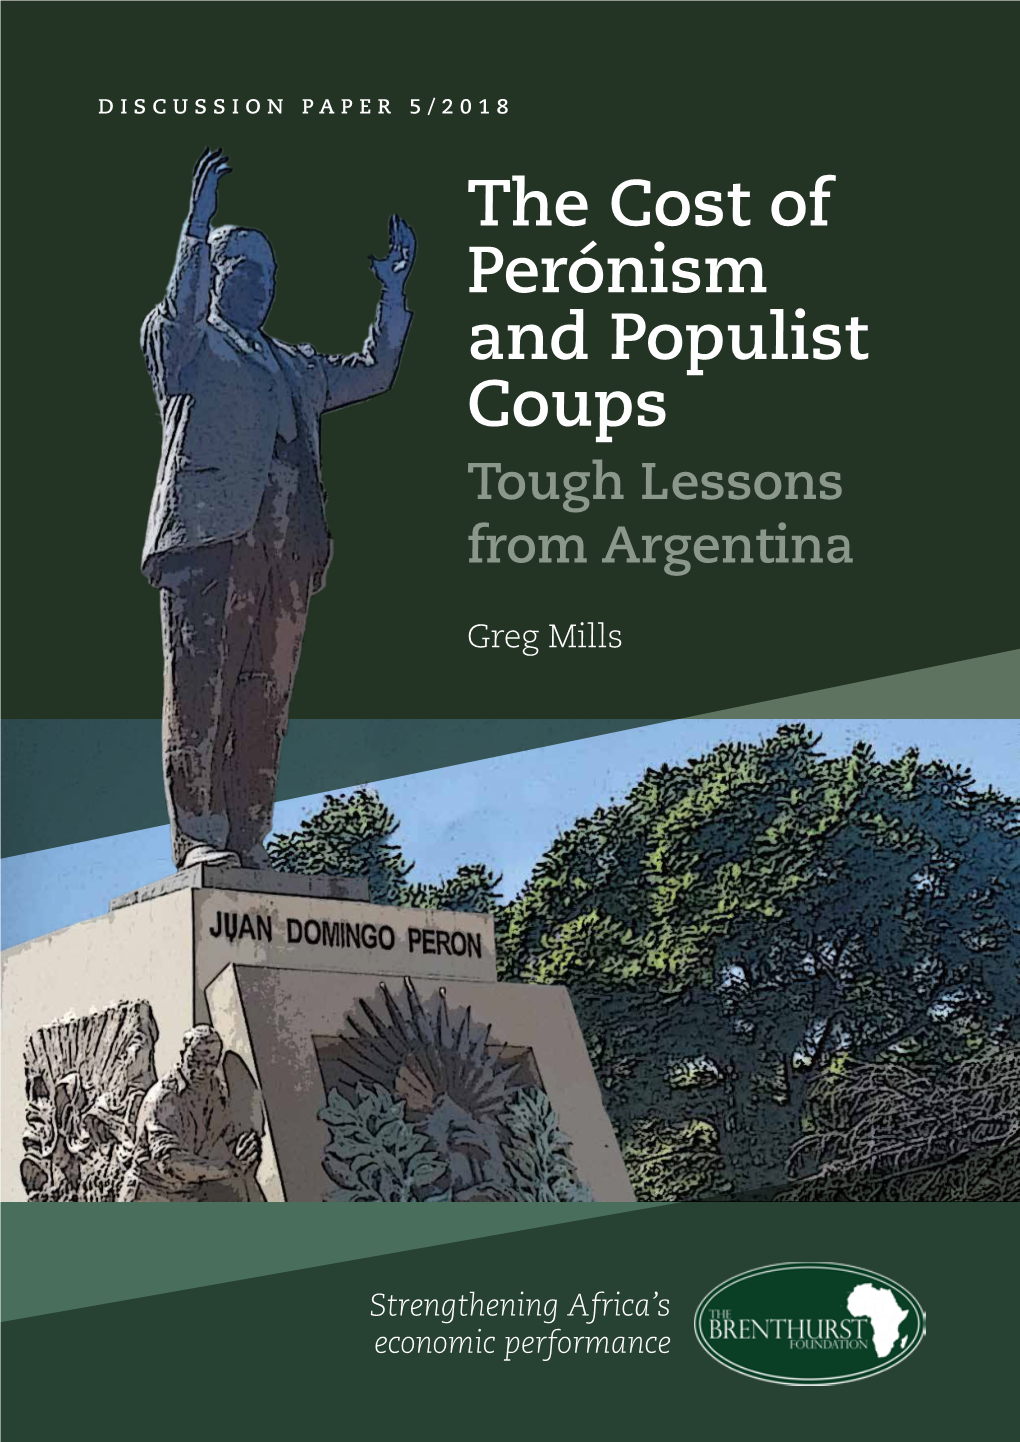 The Cost of Perónism and Populist Coups Tough Lessons from Argentina